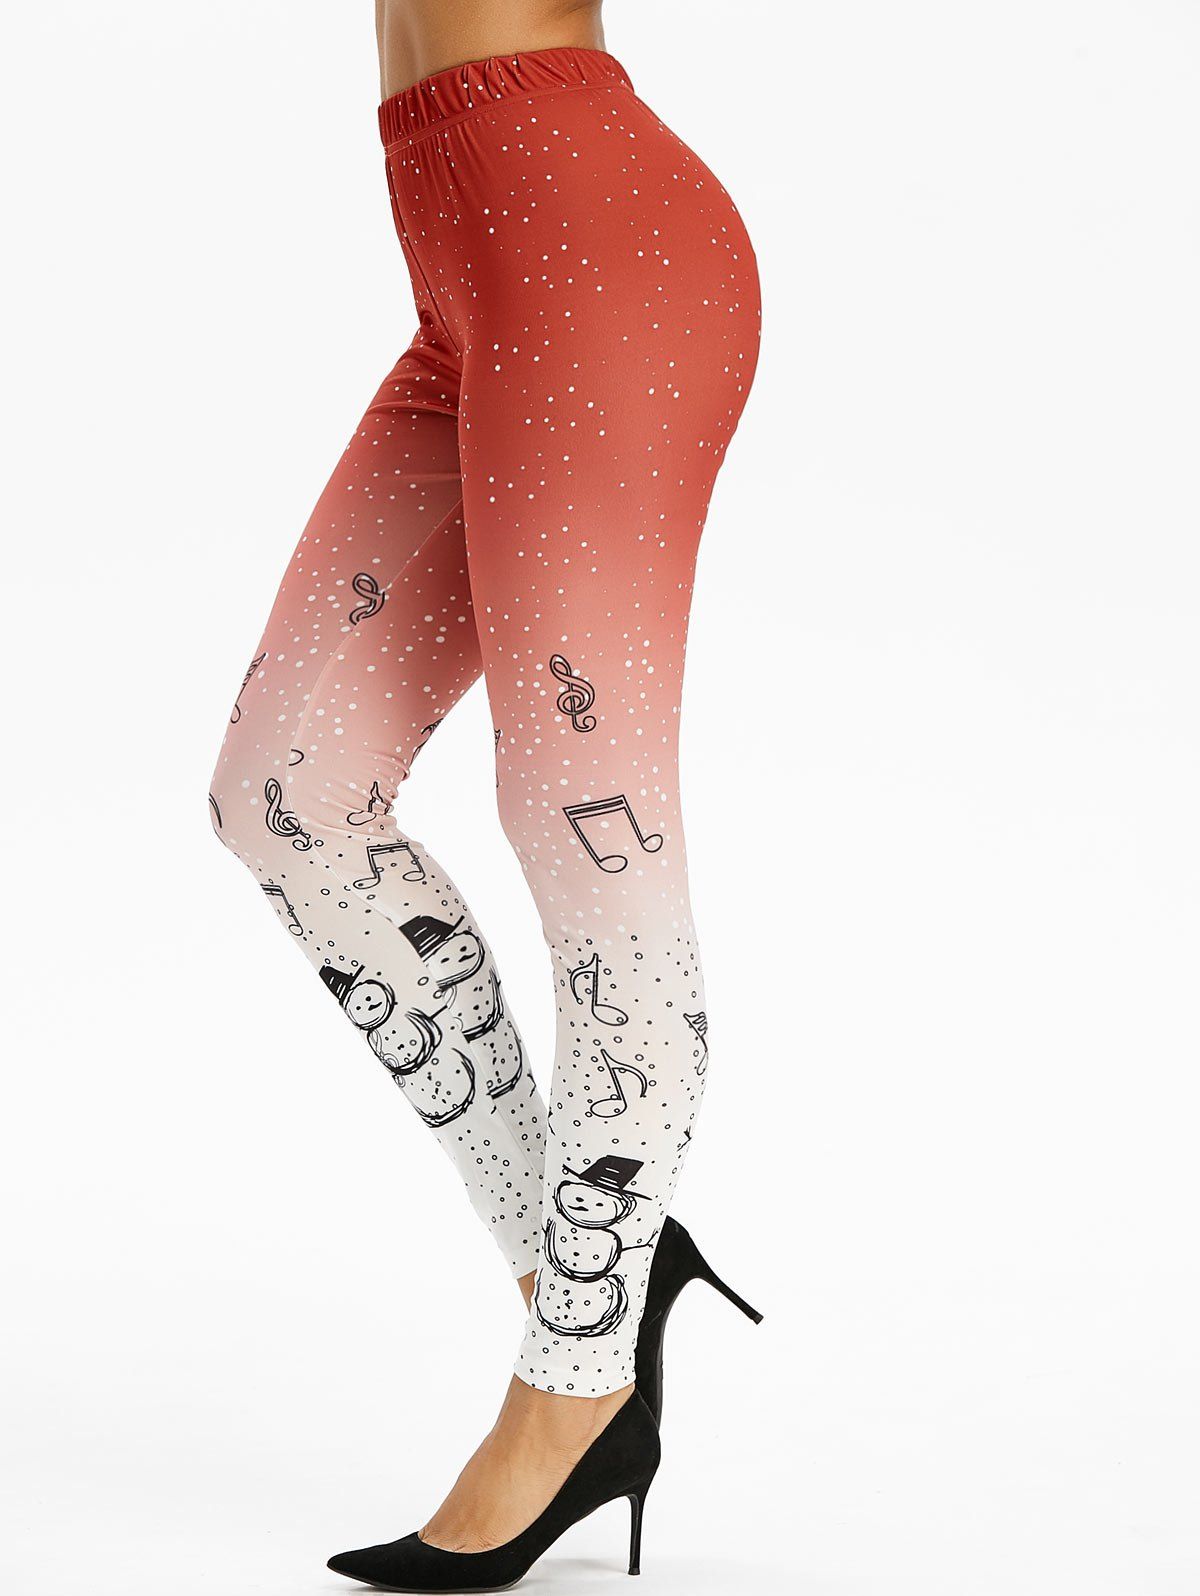 Ombre Color Snowflake Musical Print Christmas Leggings - RED 3XL